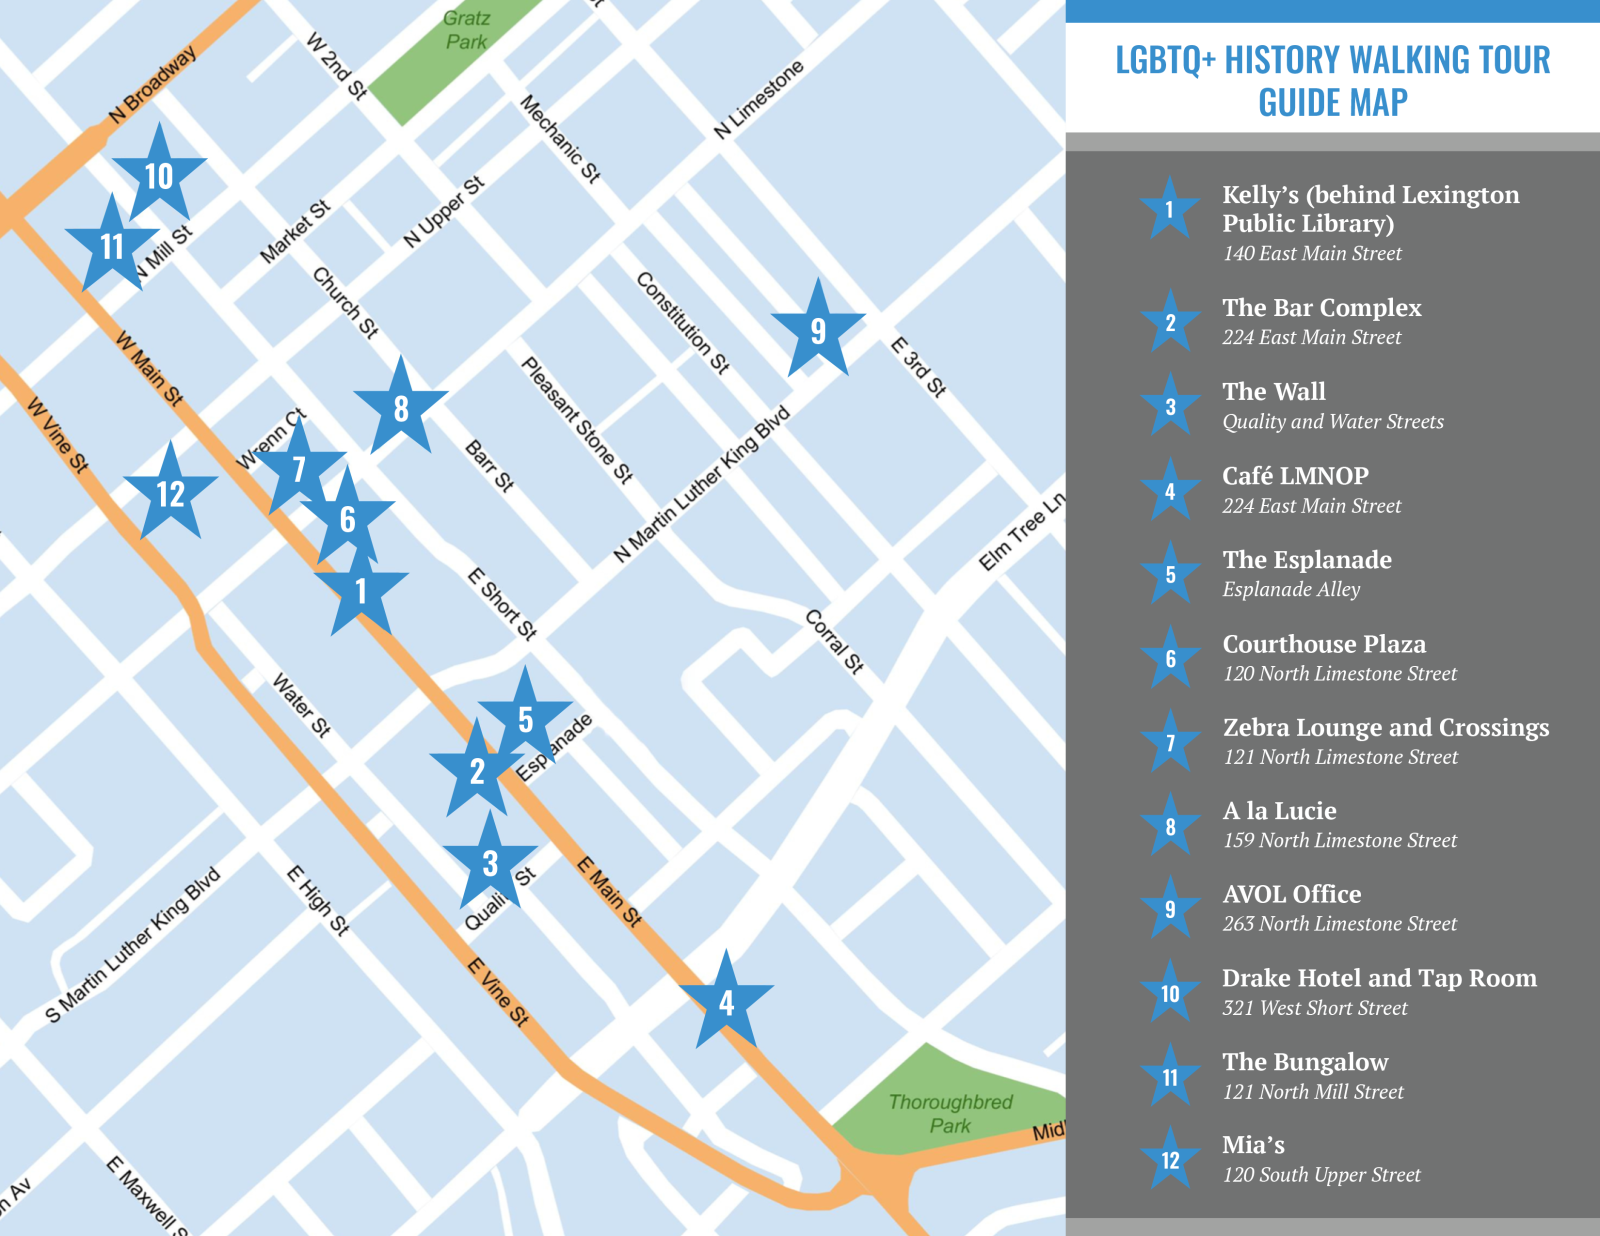 Map of Downtown Lexington with 12 stars highlighting the locations of the walking tour stops.